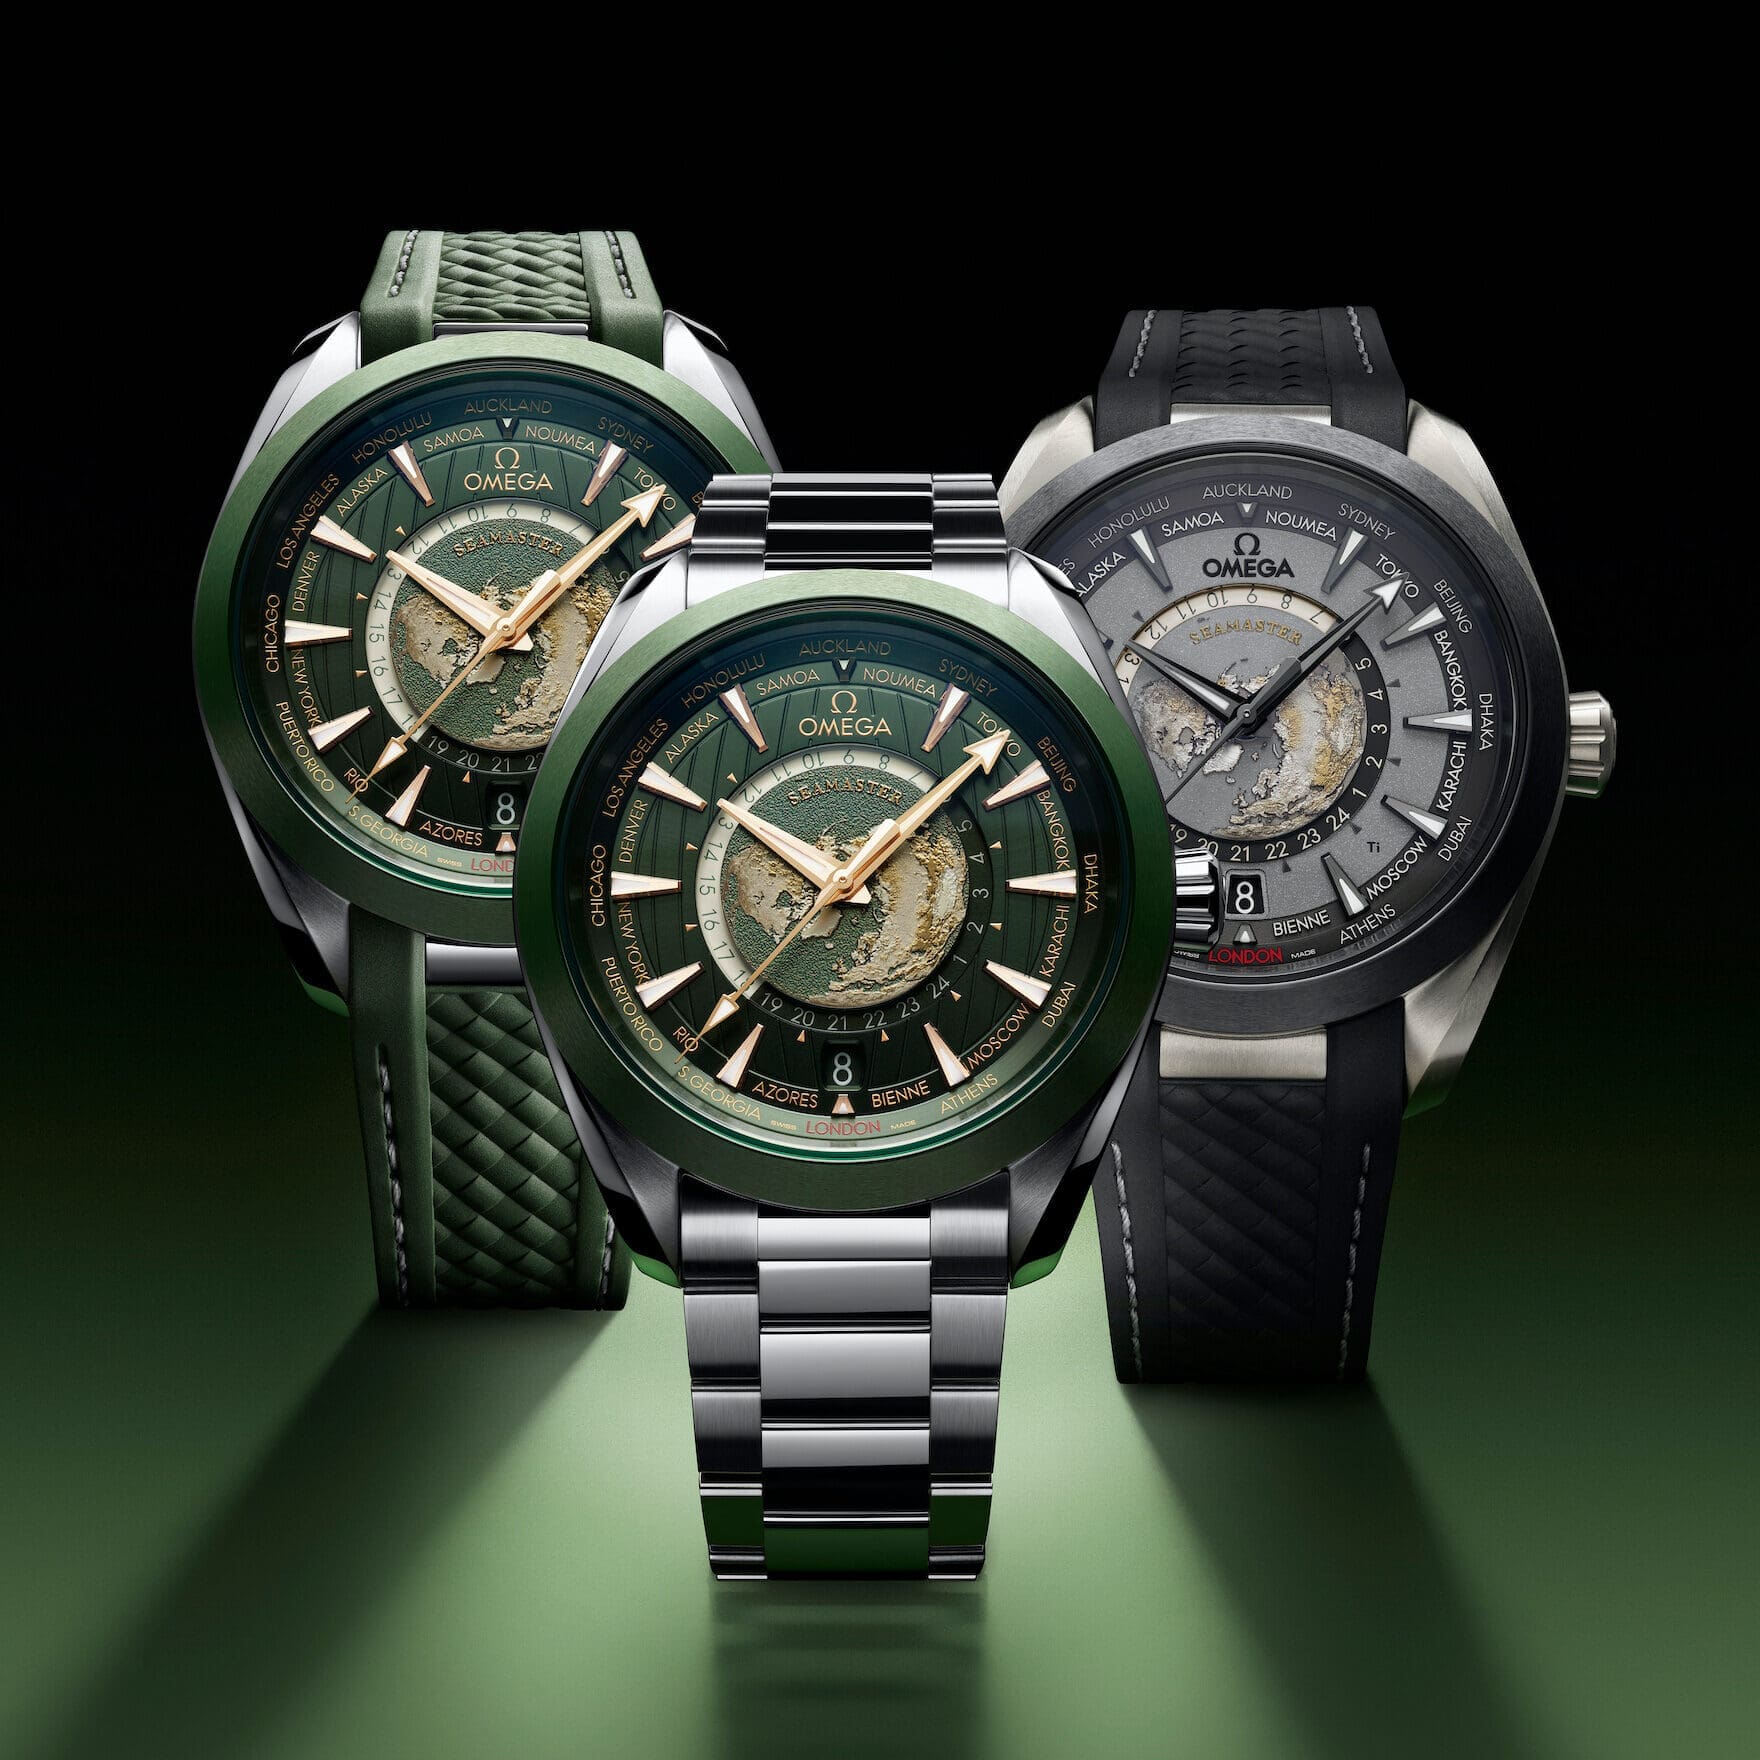 Omega revisits the Seamaster Aqua Terra Worldtimer with new titanium and steel models with coloured ceramic bezels